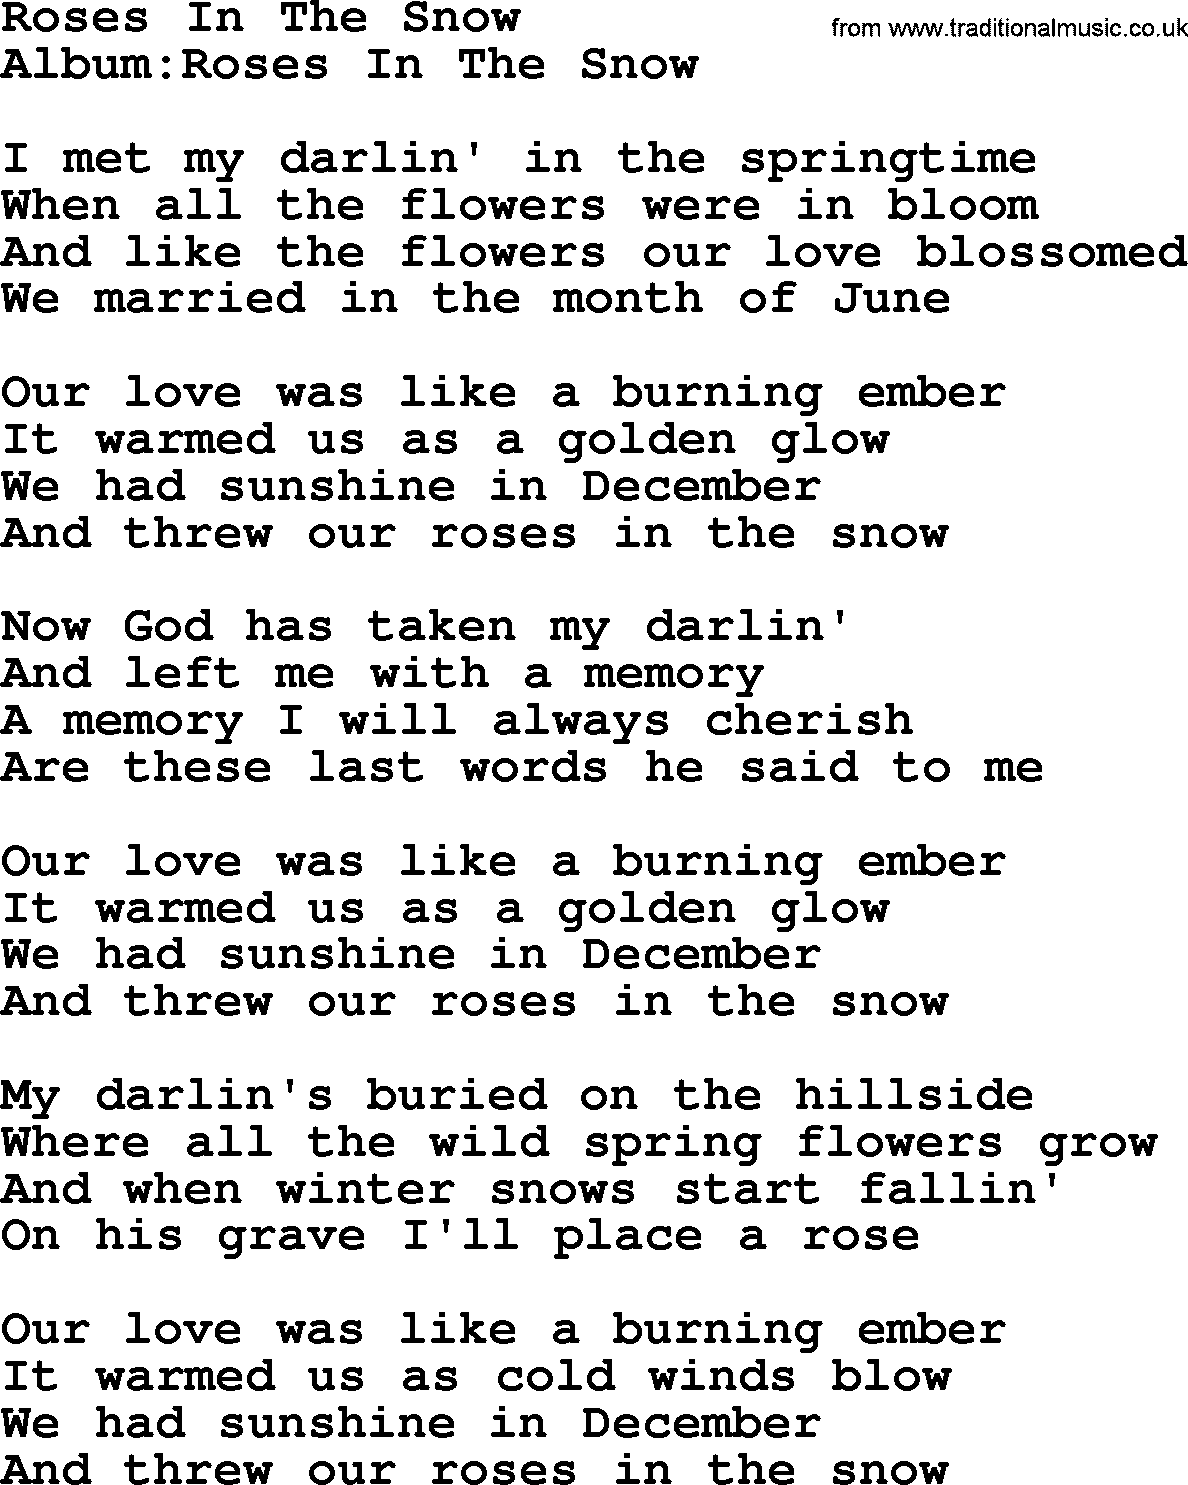 Emmylou Harris song: Roses In The Snow lyrics